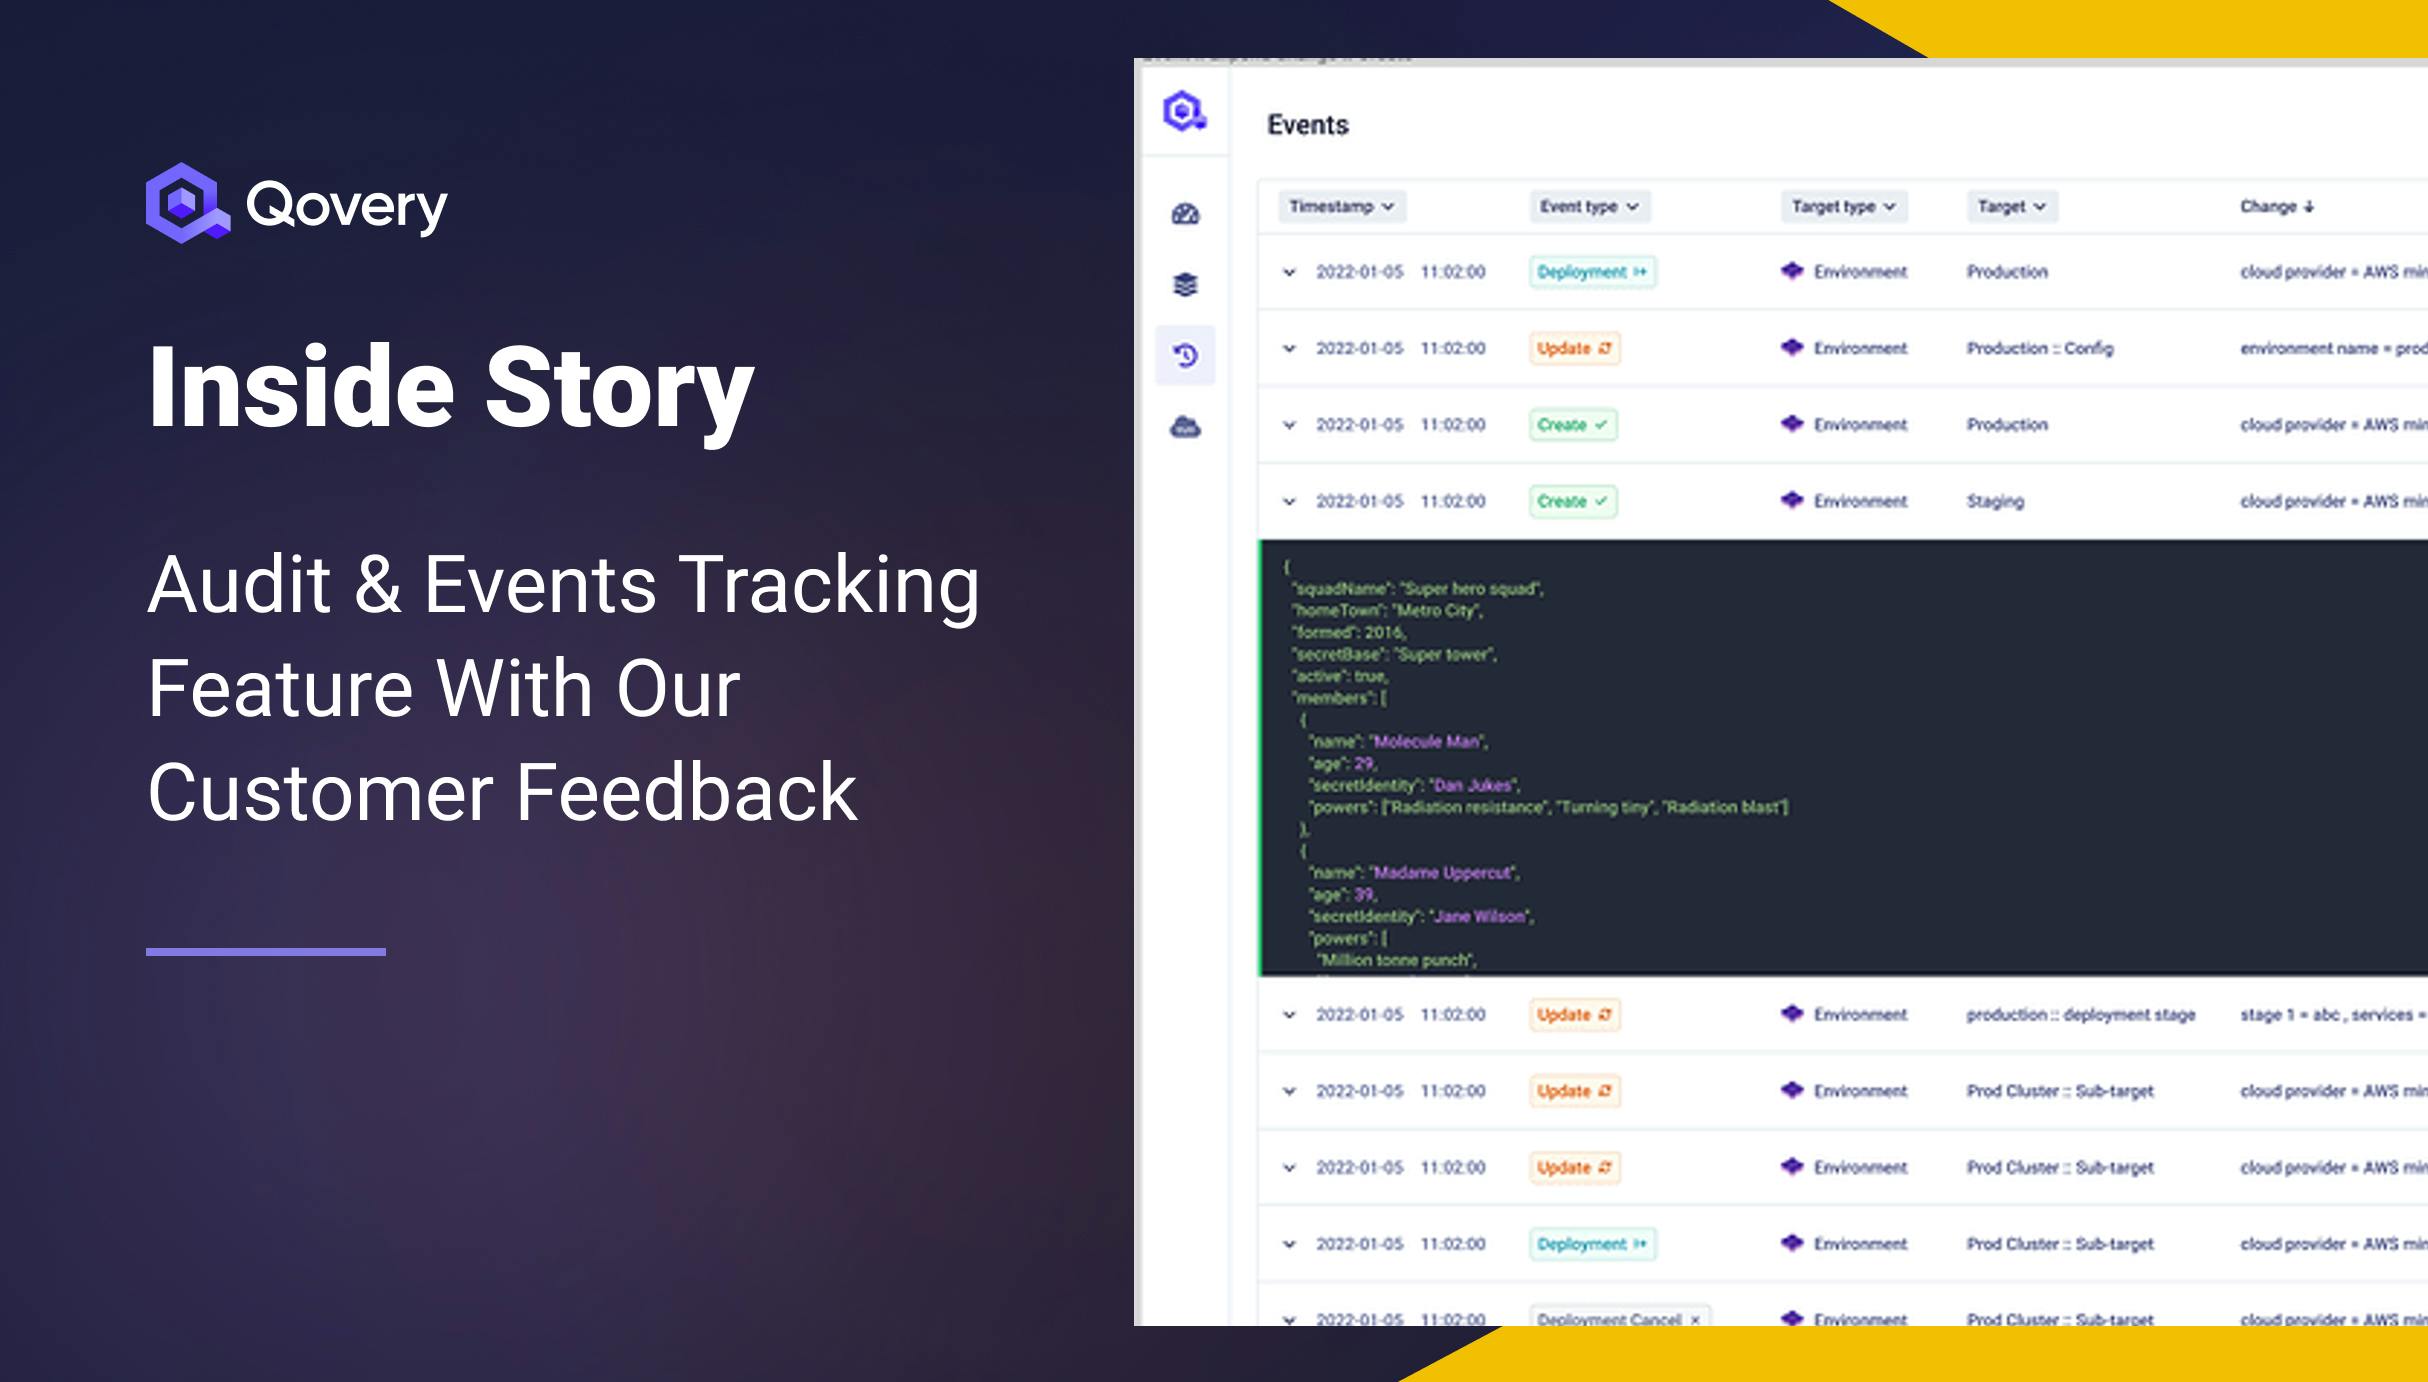 Inside Story: Audit & Events Tracking Feature With Our Customer Feedback - Qovery